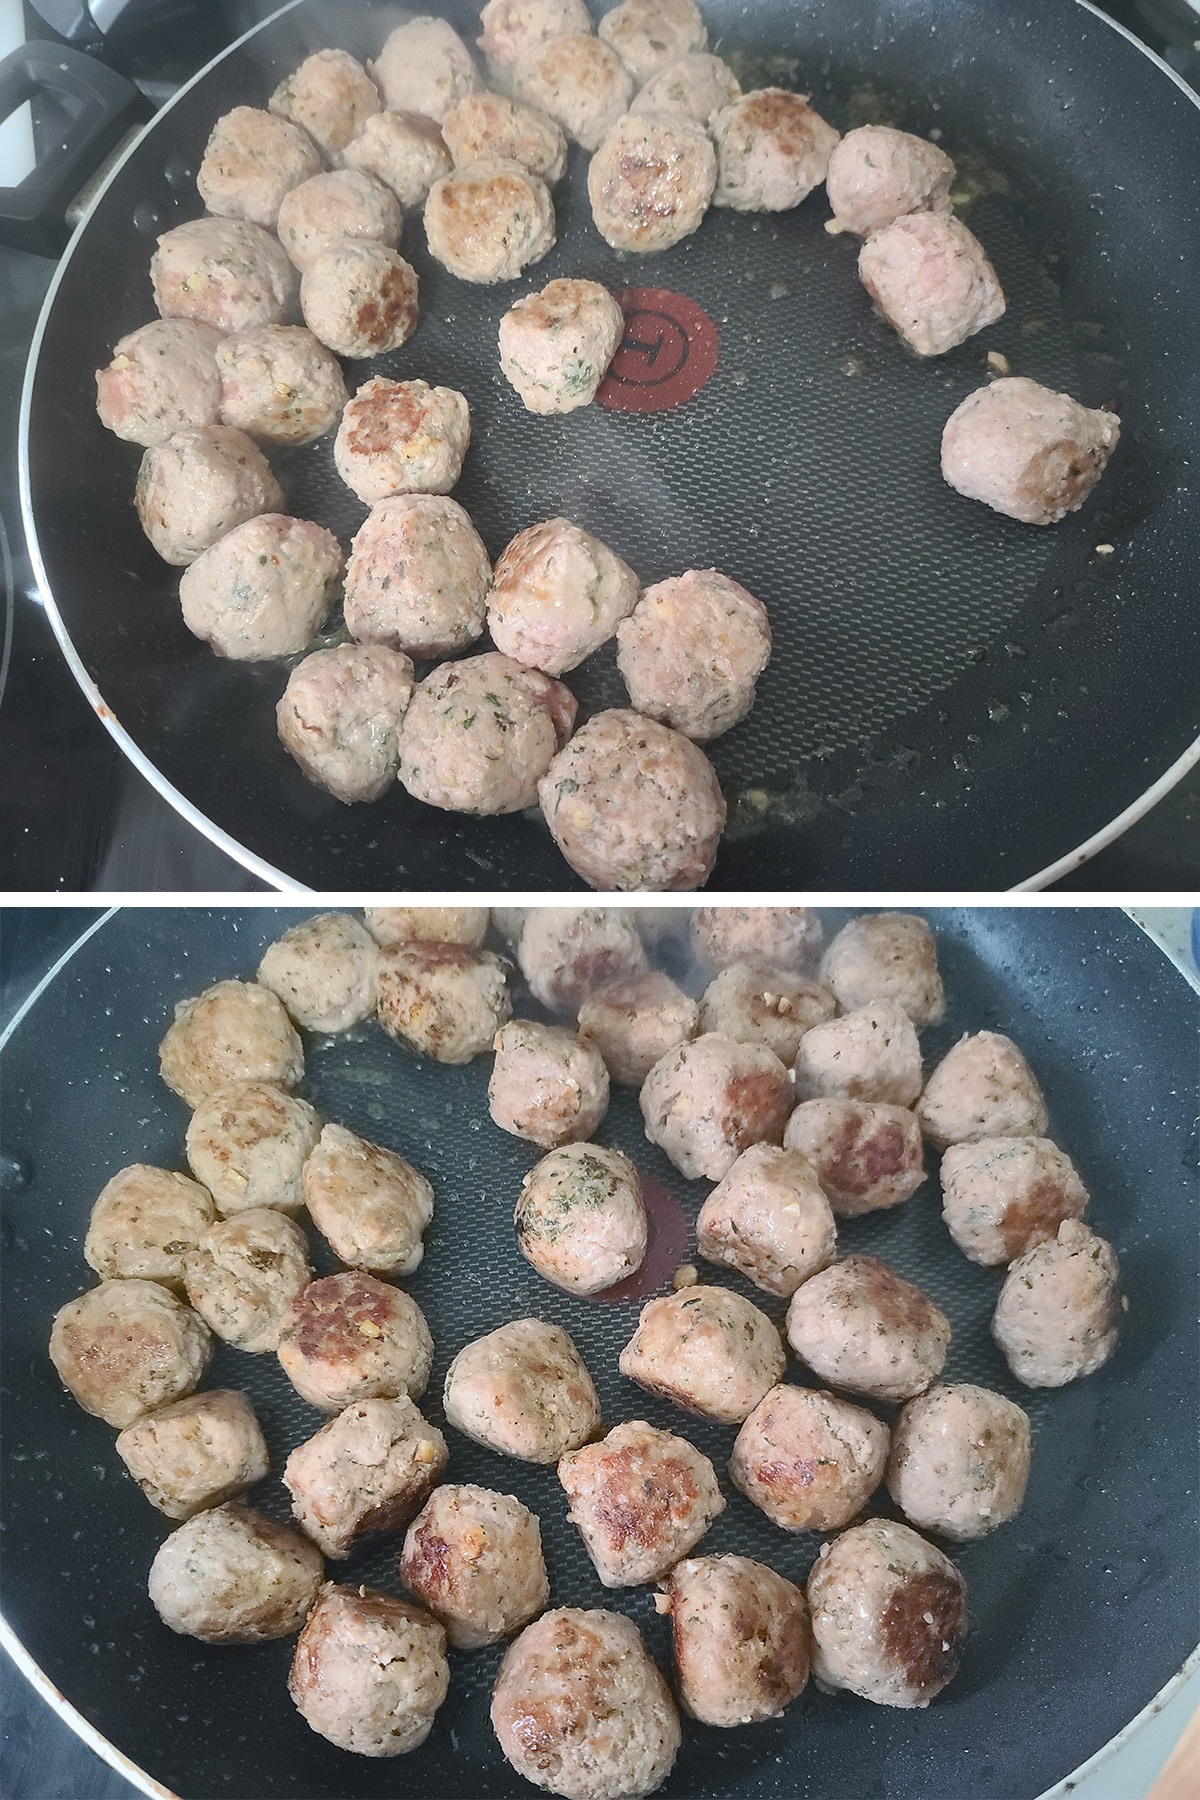 A 2 part image showing the meatballs being browned in a pan.